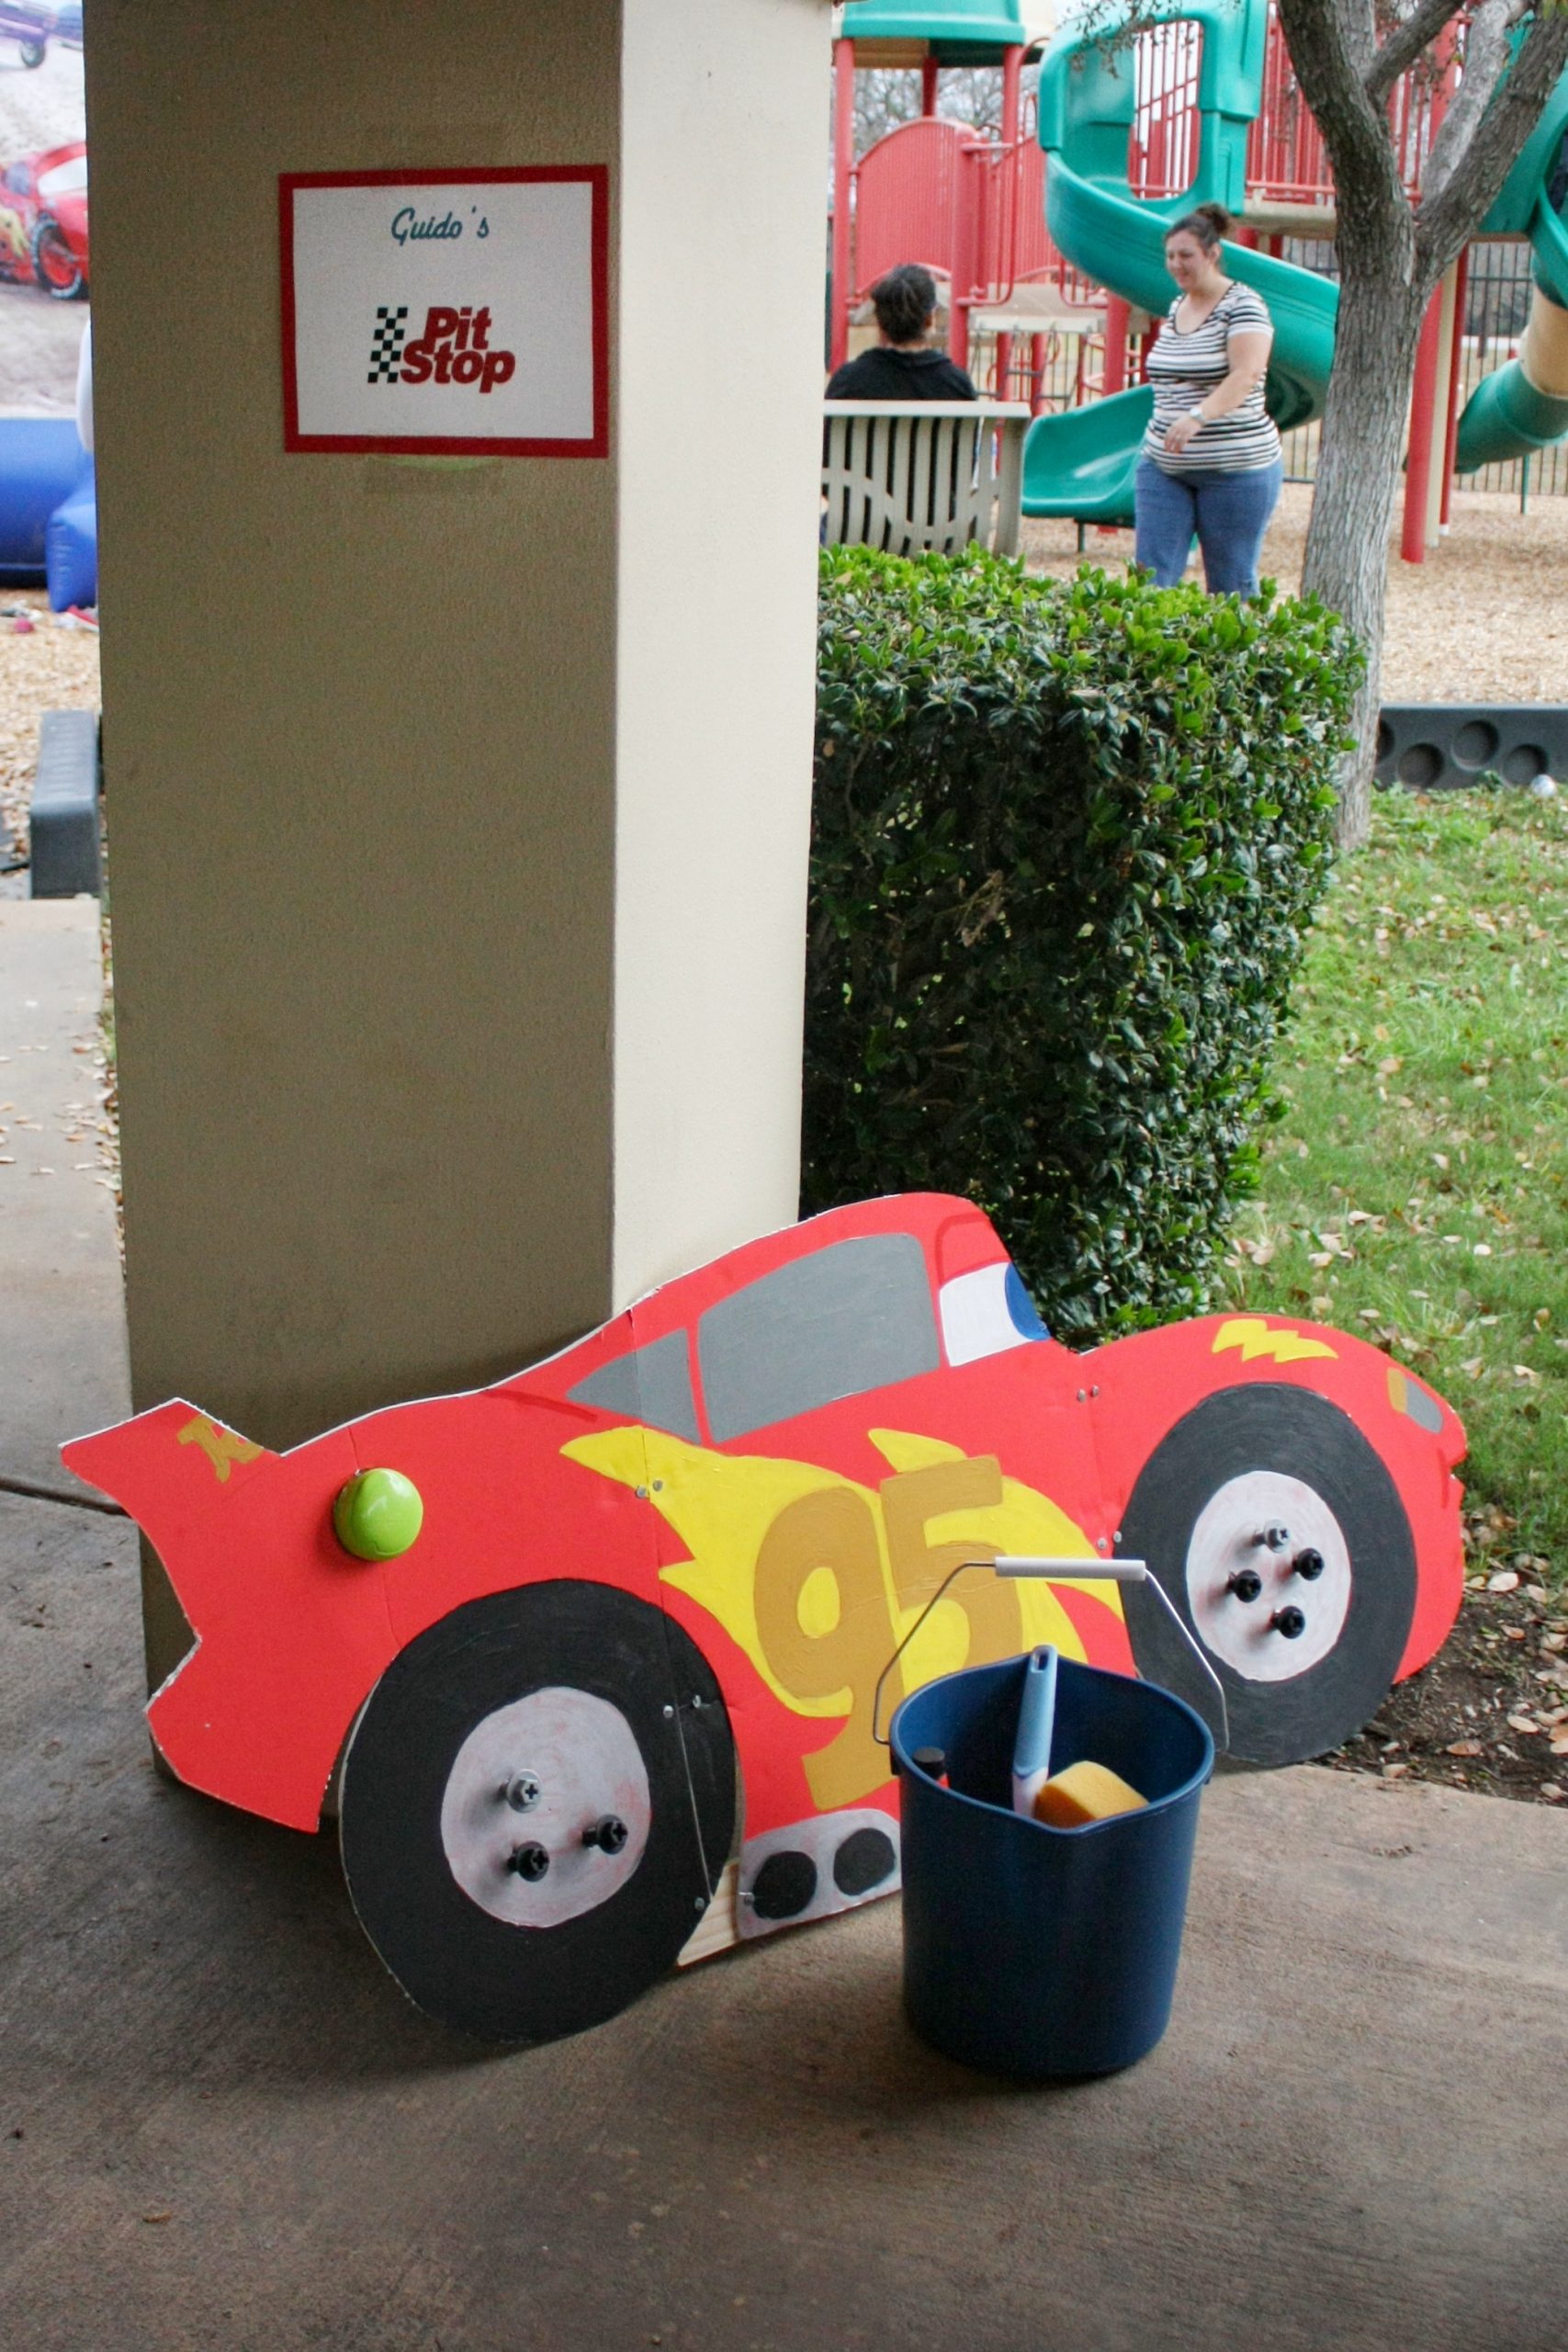 Disney Cars birthday party games: Guido's Pot Stop